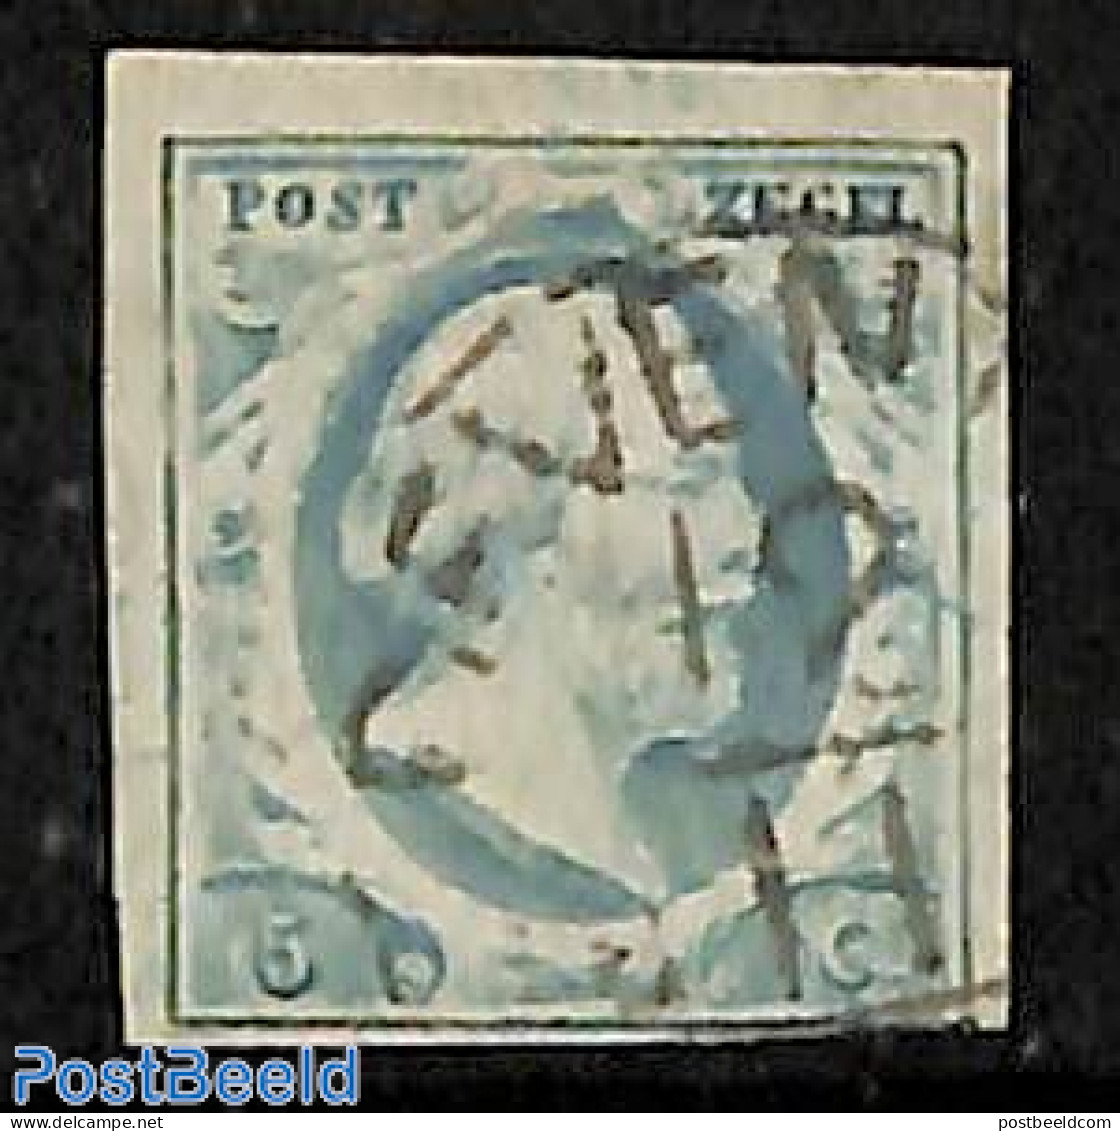 Netherlands 1852 5c, Used, DEVENTER-C, Used Stamps - Used Stamps